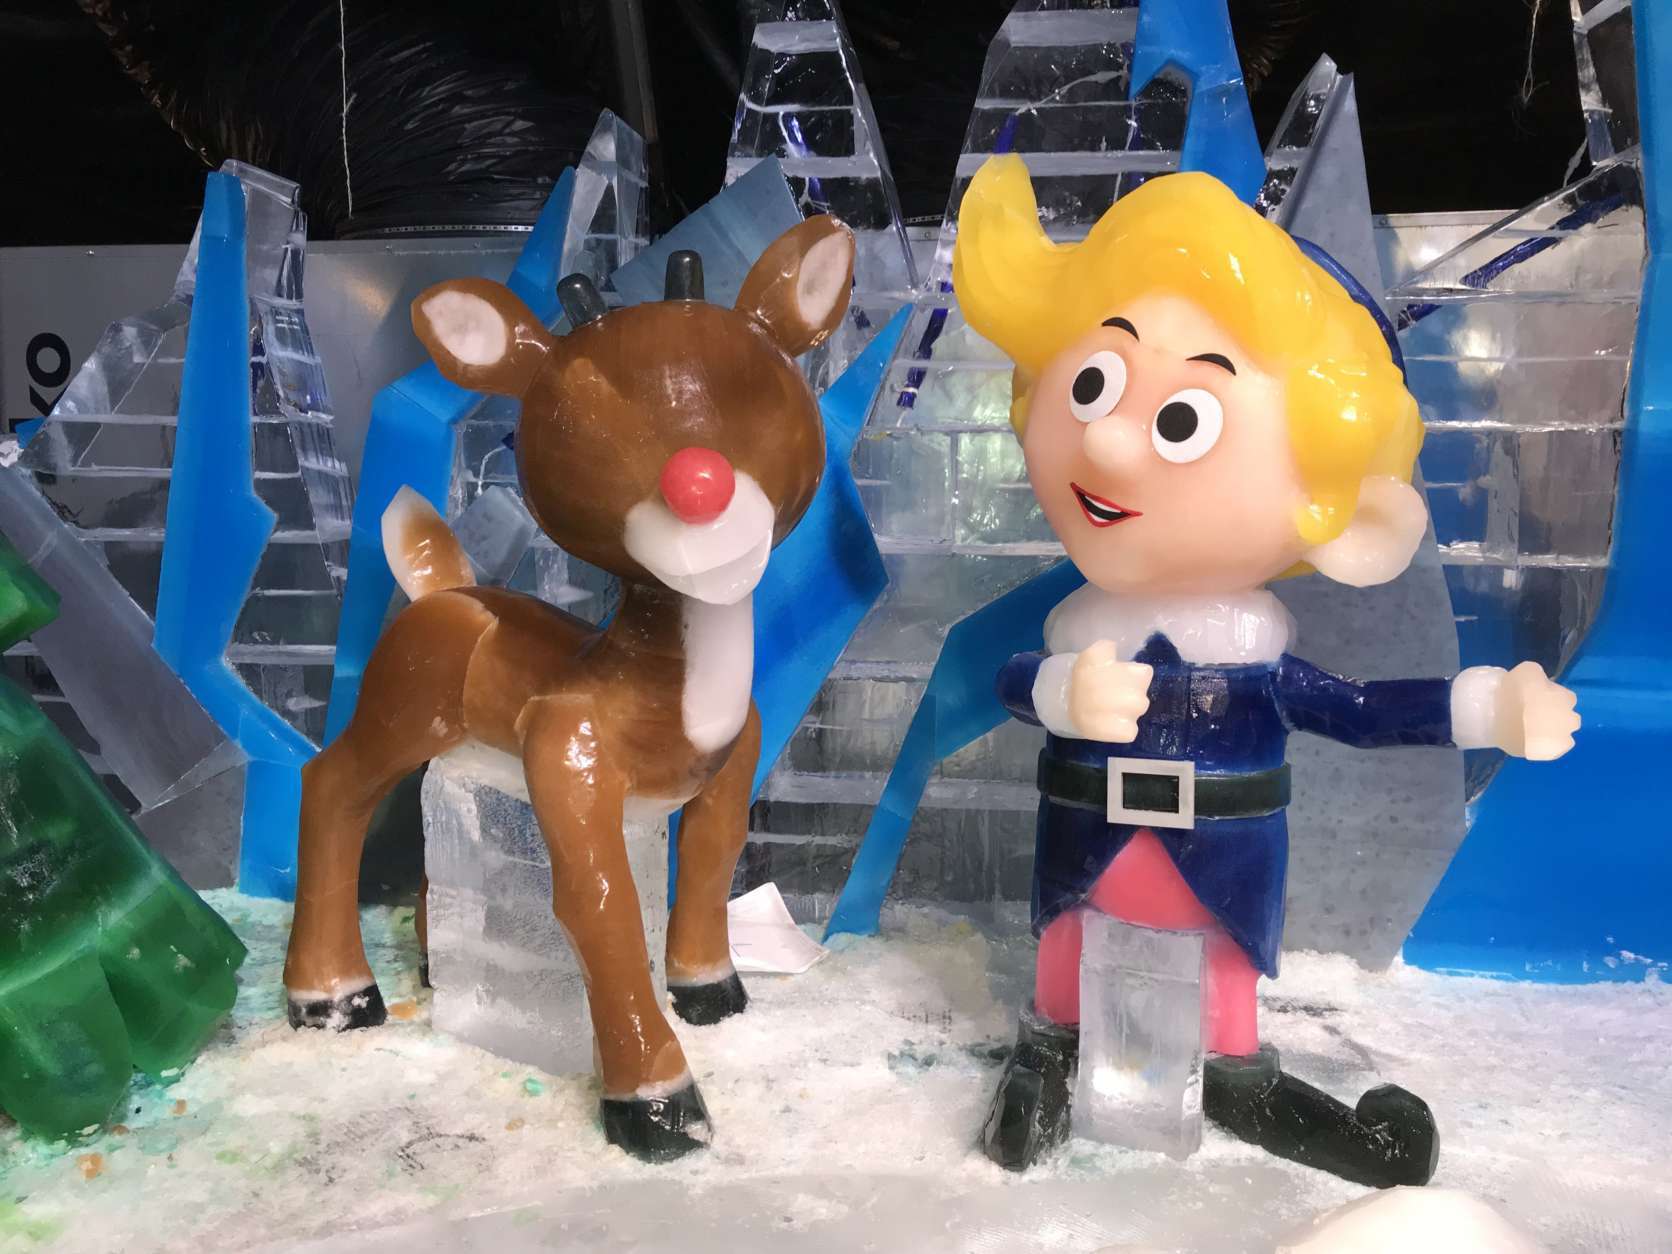 The display shows Rudolph with Hermey the Elf. Rudolph's eyes have not yet been added. (WTOP/Michelle Basch)